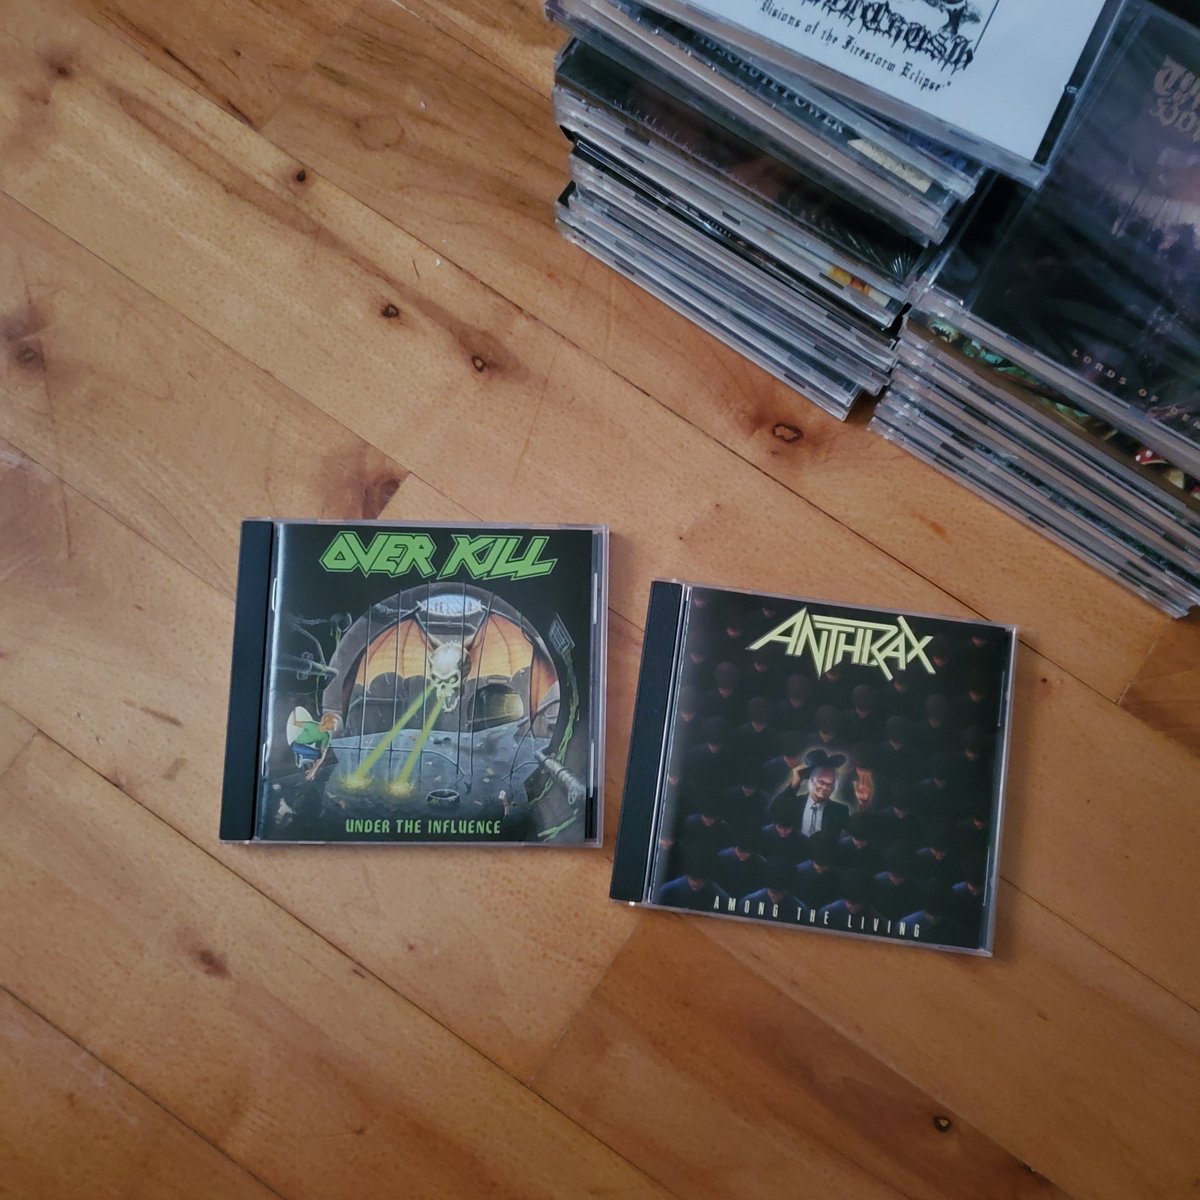 ALBUM WAR!! 🤘👊⚔  Yesterday was the anniversary of OVERKILL's Thrasherpiece Under the Influence. So today's WAR is a Thrash Battle! Pick a side. OVERKILL Under the Influence vs. ANTHRAX Among The Living!#overkill #anthrax #undertheinfluence #amongtheliving #thrashmetal